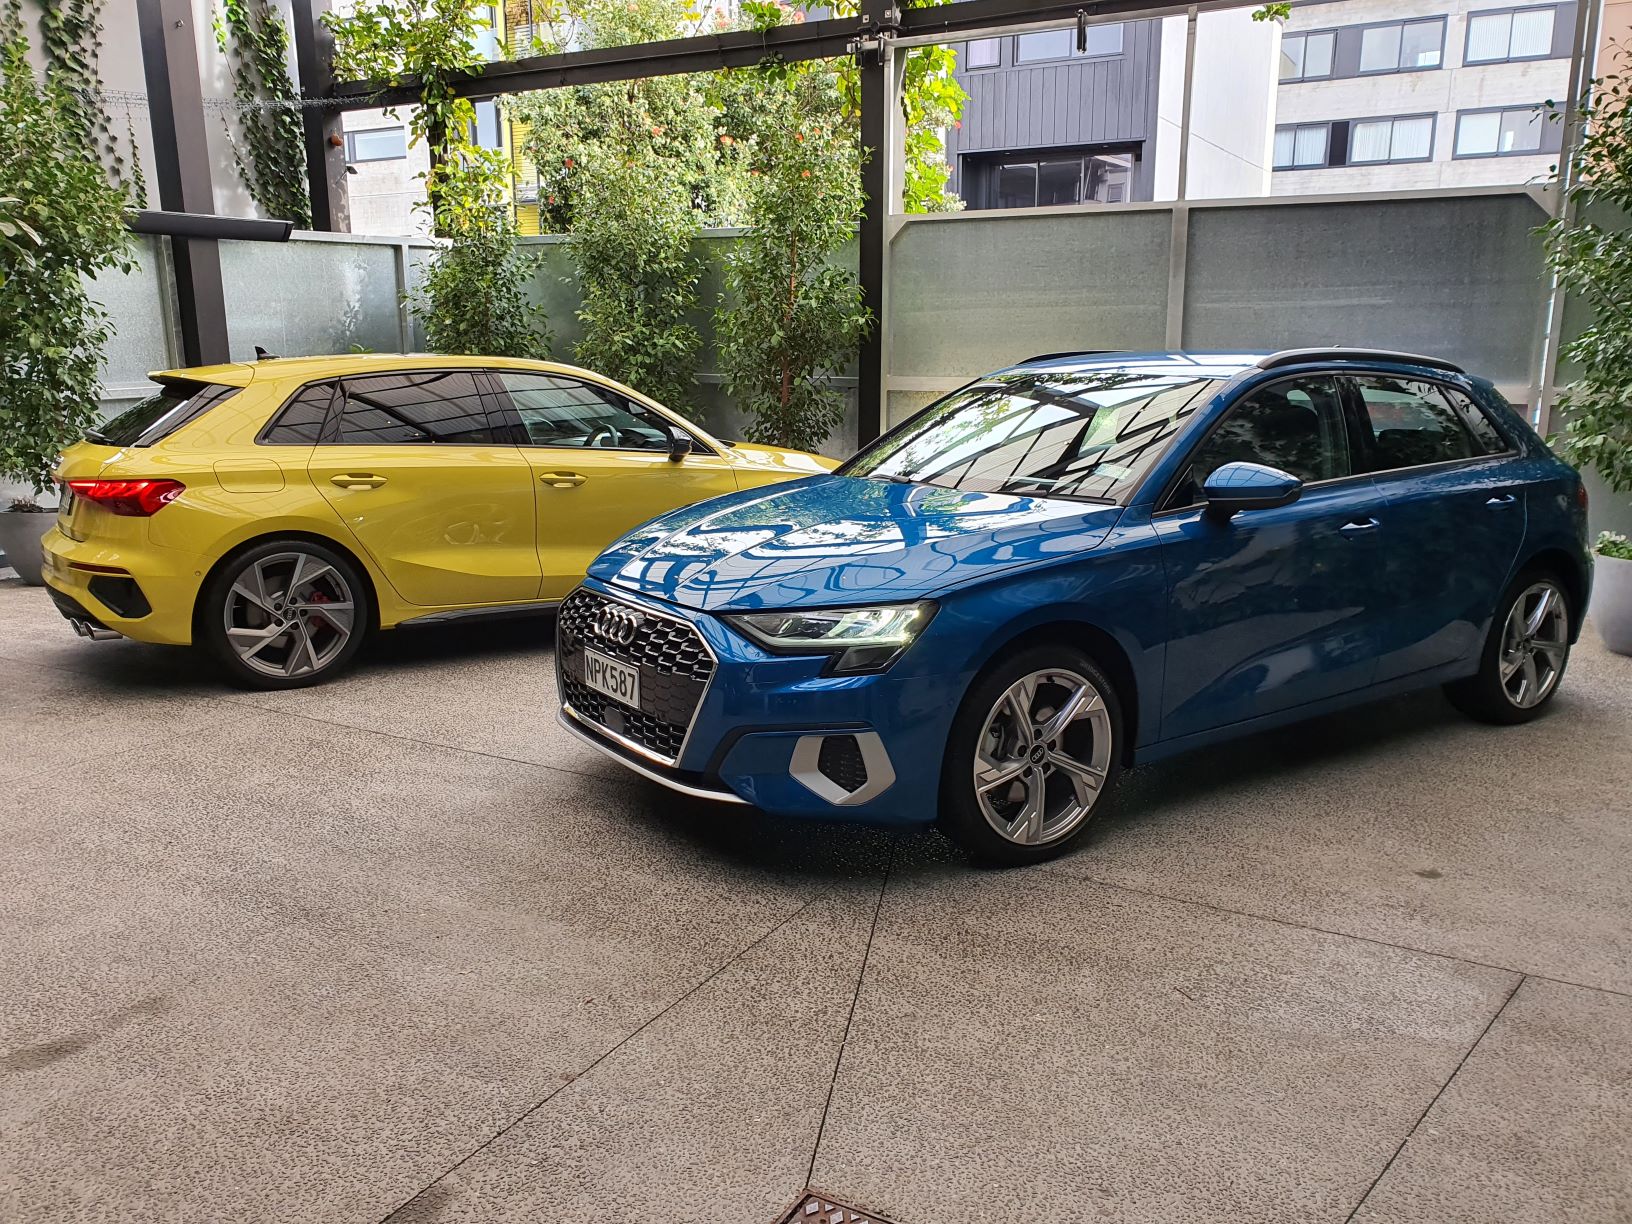 The new Audi A3 and S3